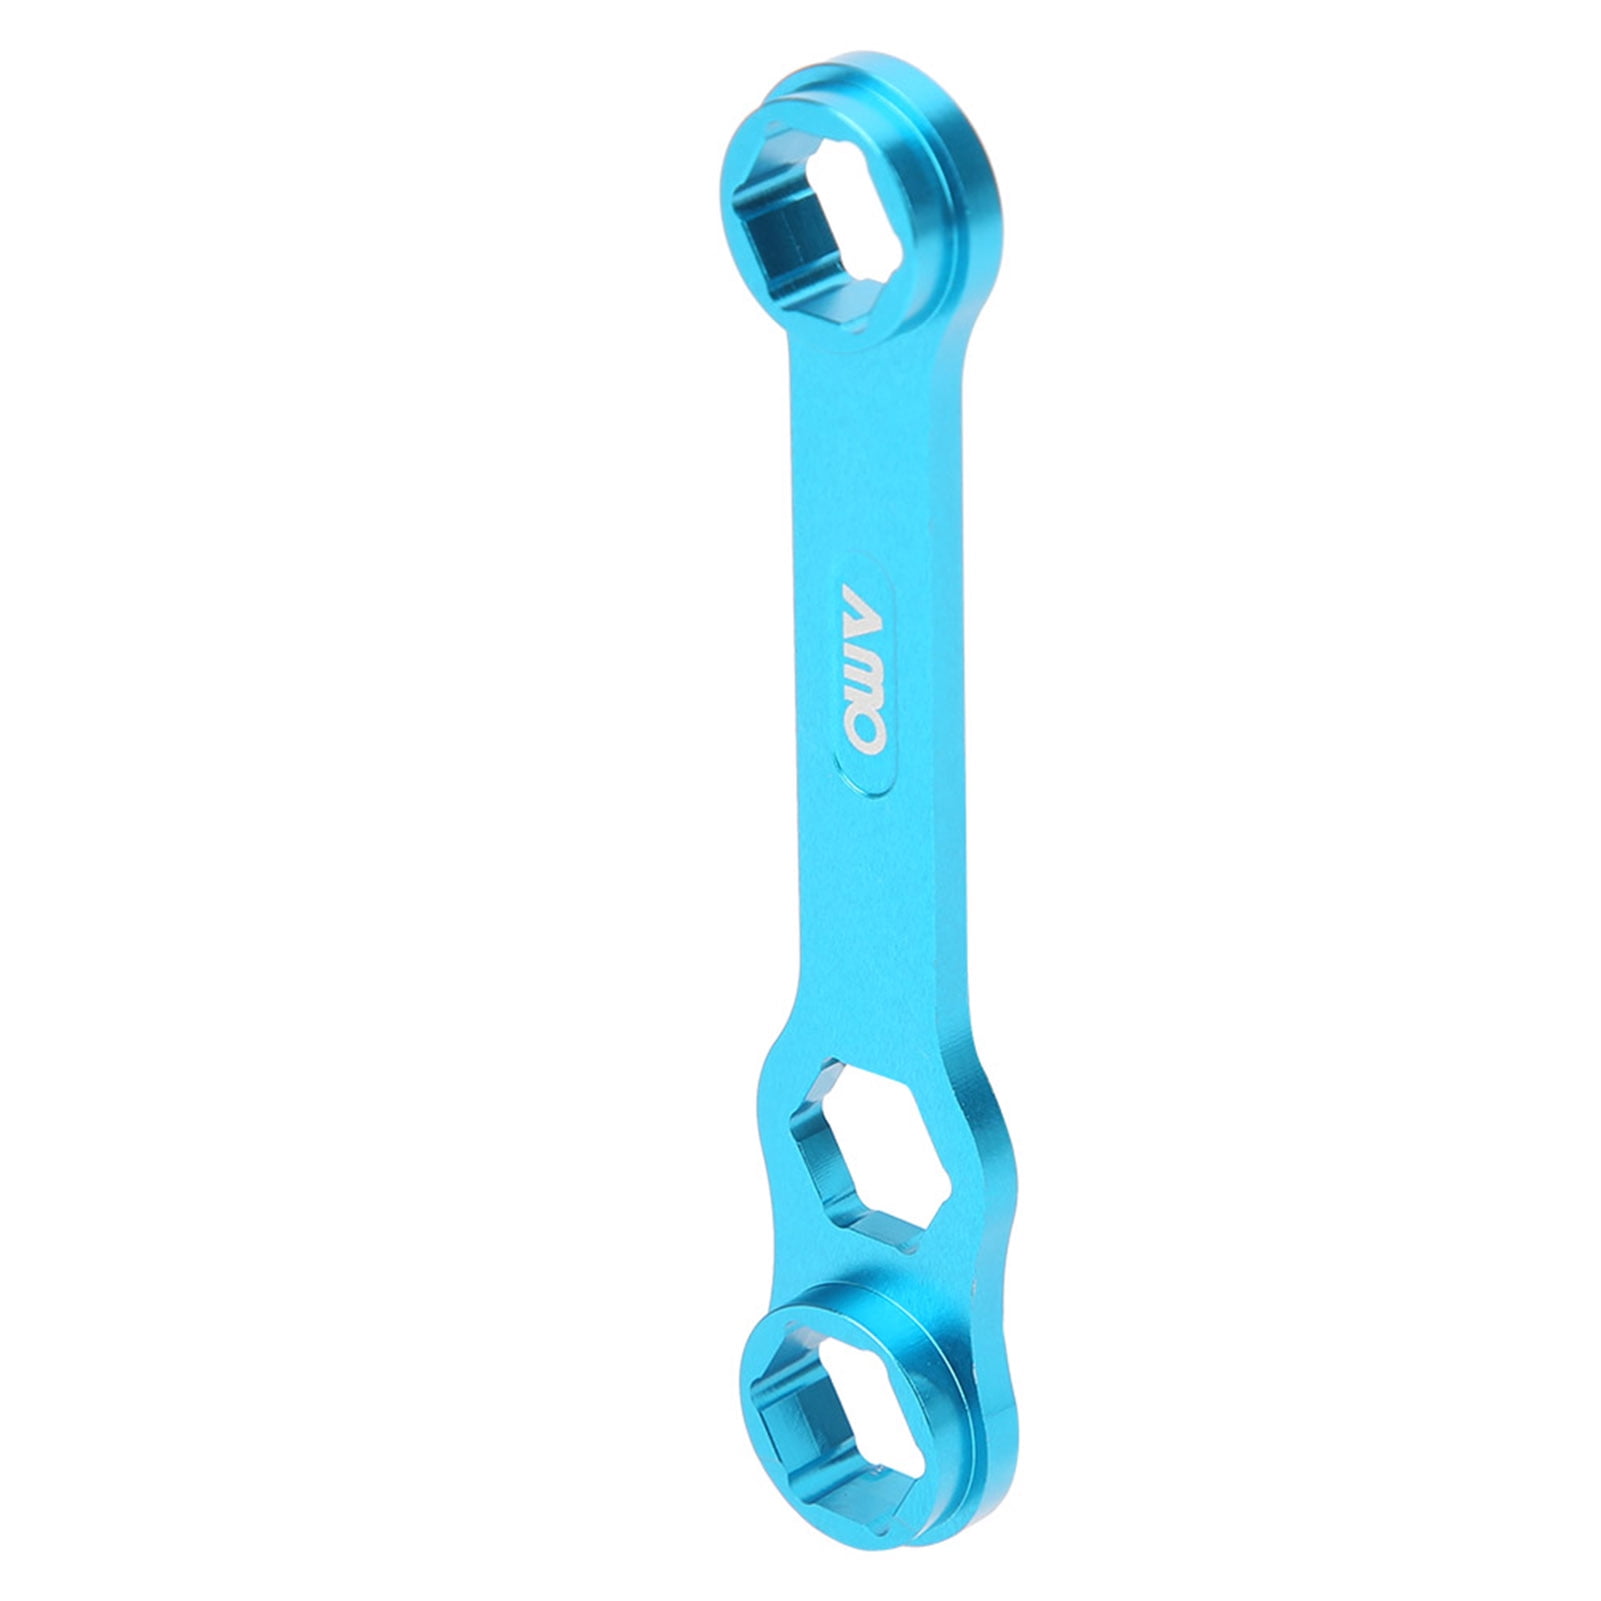 Aluminum Alloy Aluminium Alloy Fishing Reel Wrench Sturdy Wrench 10.0/10.2/11mm,for Accompanying Equipment 